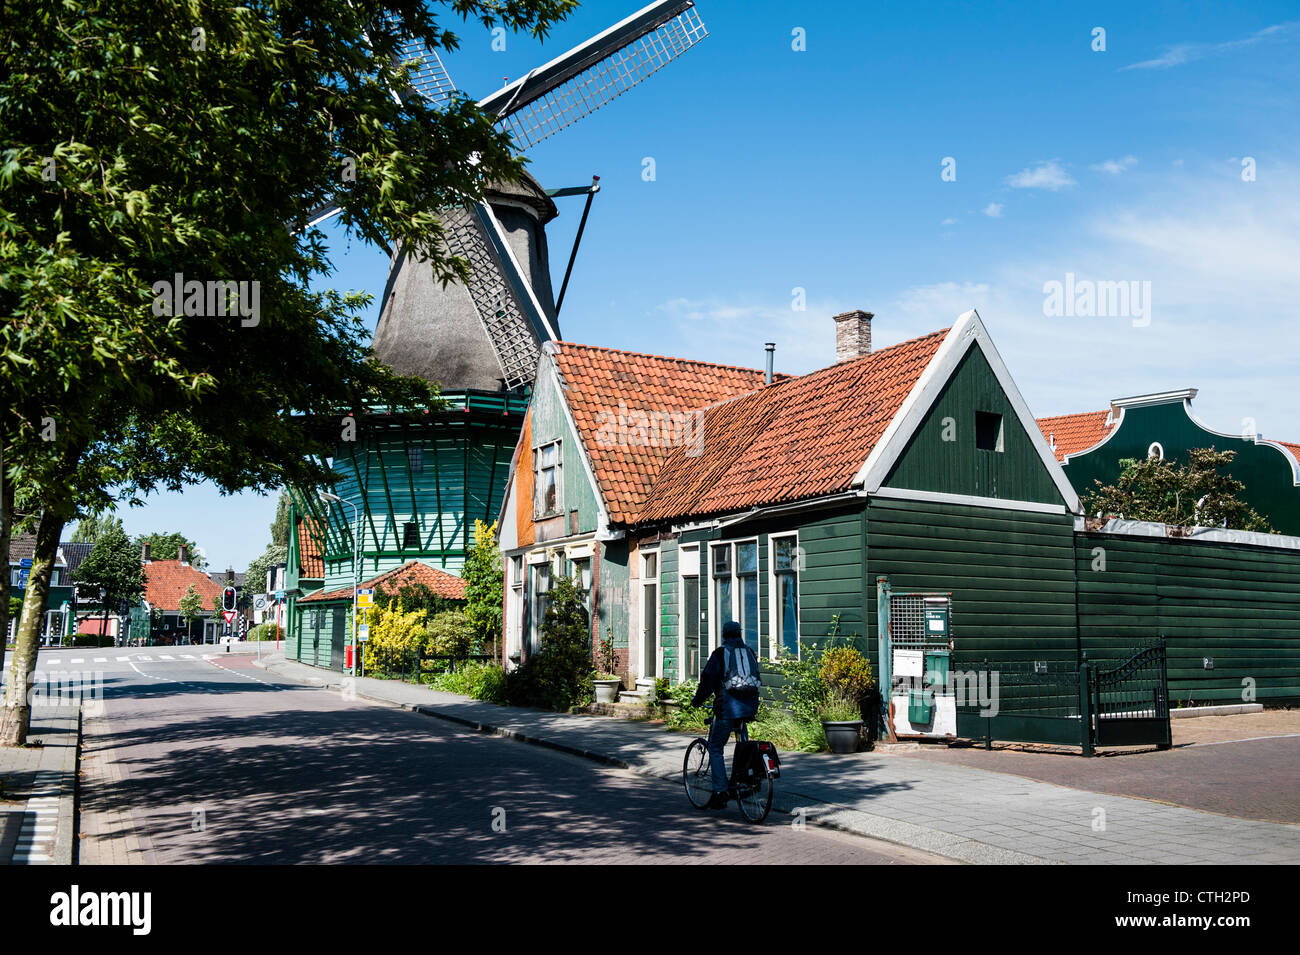 The Zaanse Schans is a neighbourhood of Zaandam. It has a collection of well-preserved historic windmills and houses. Stock Photo